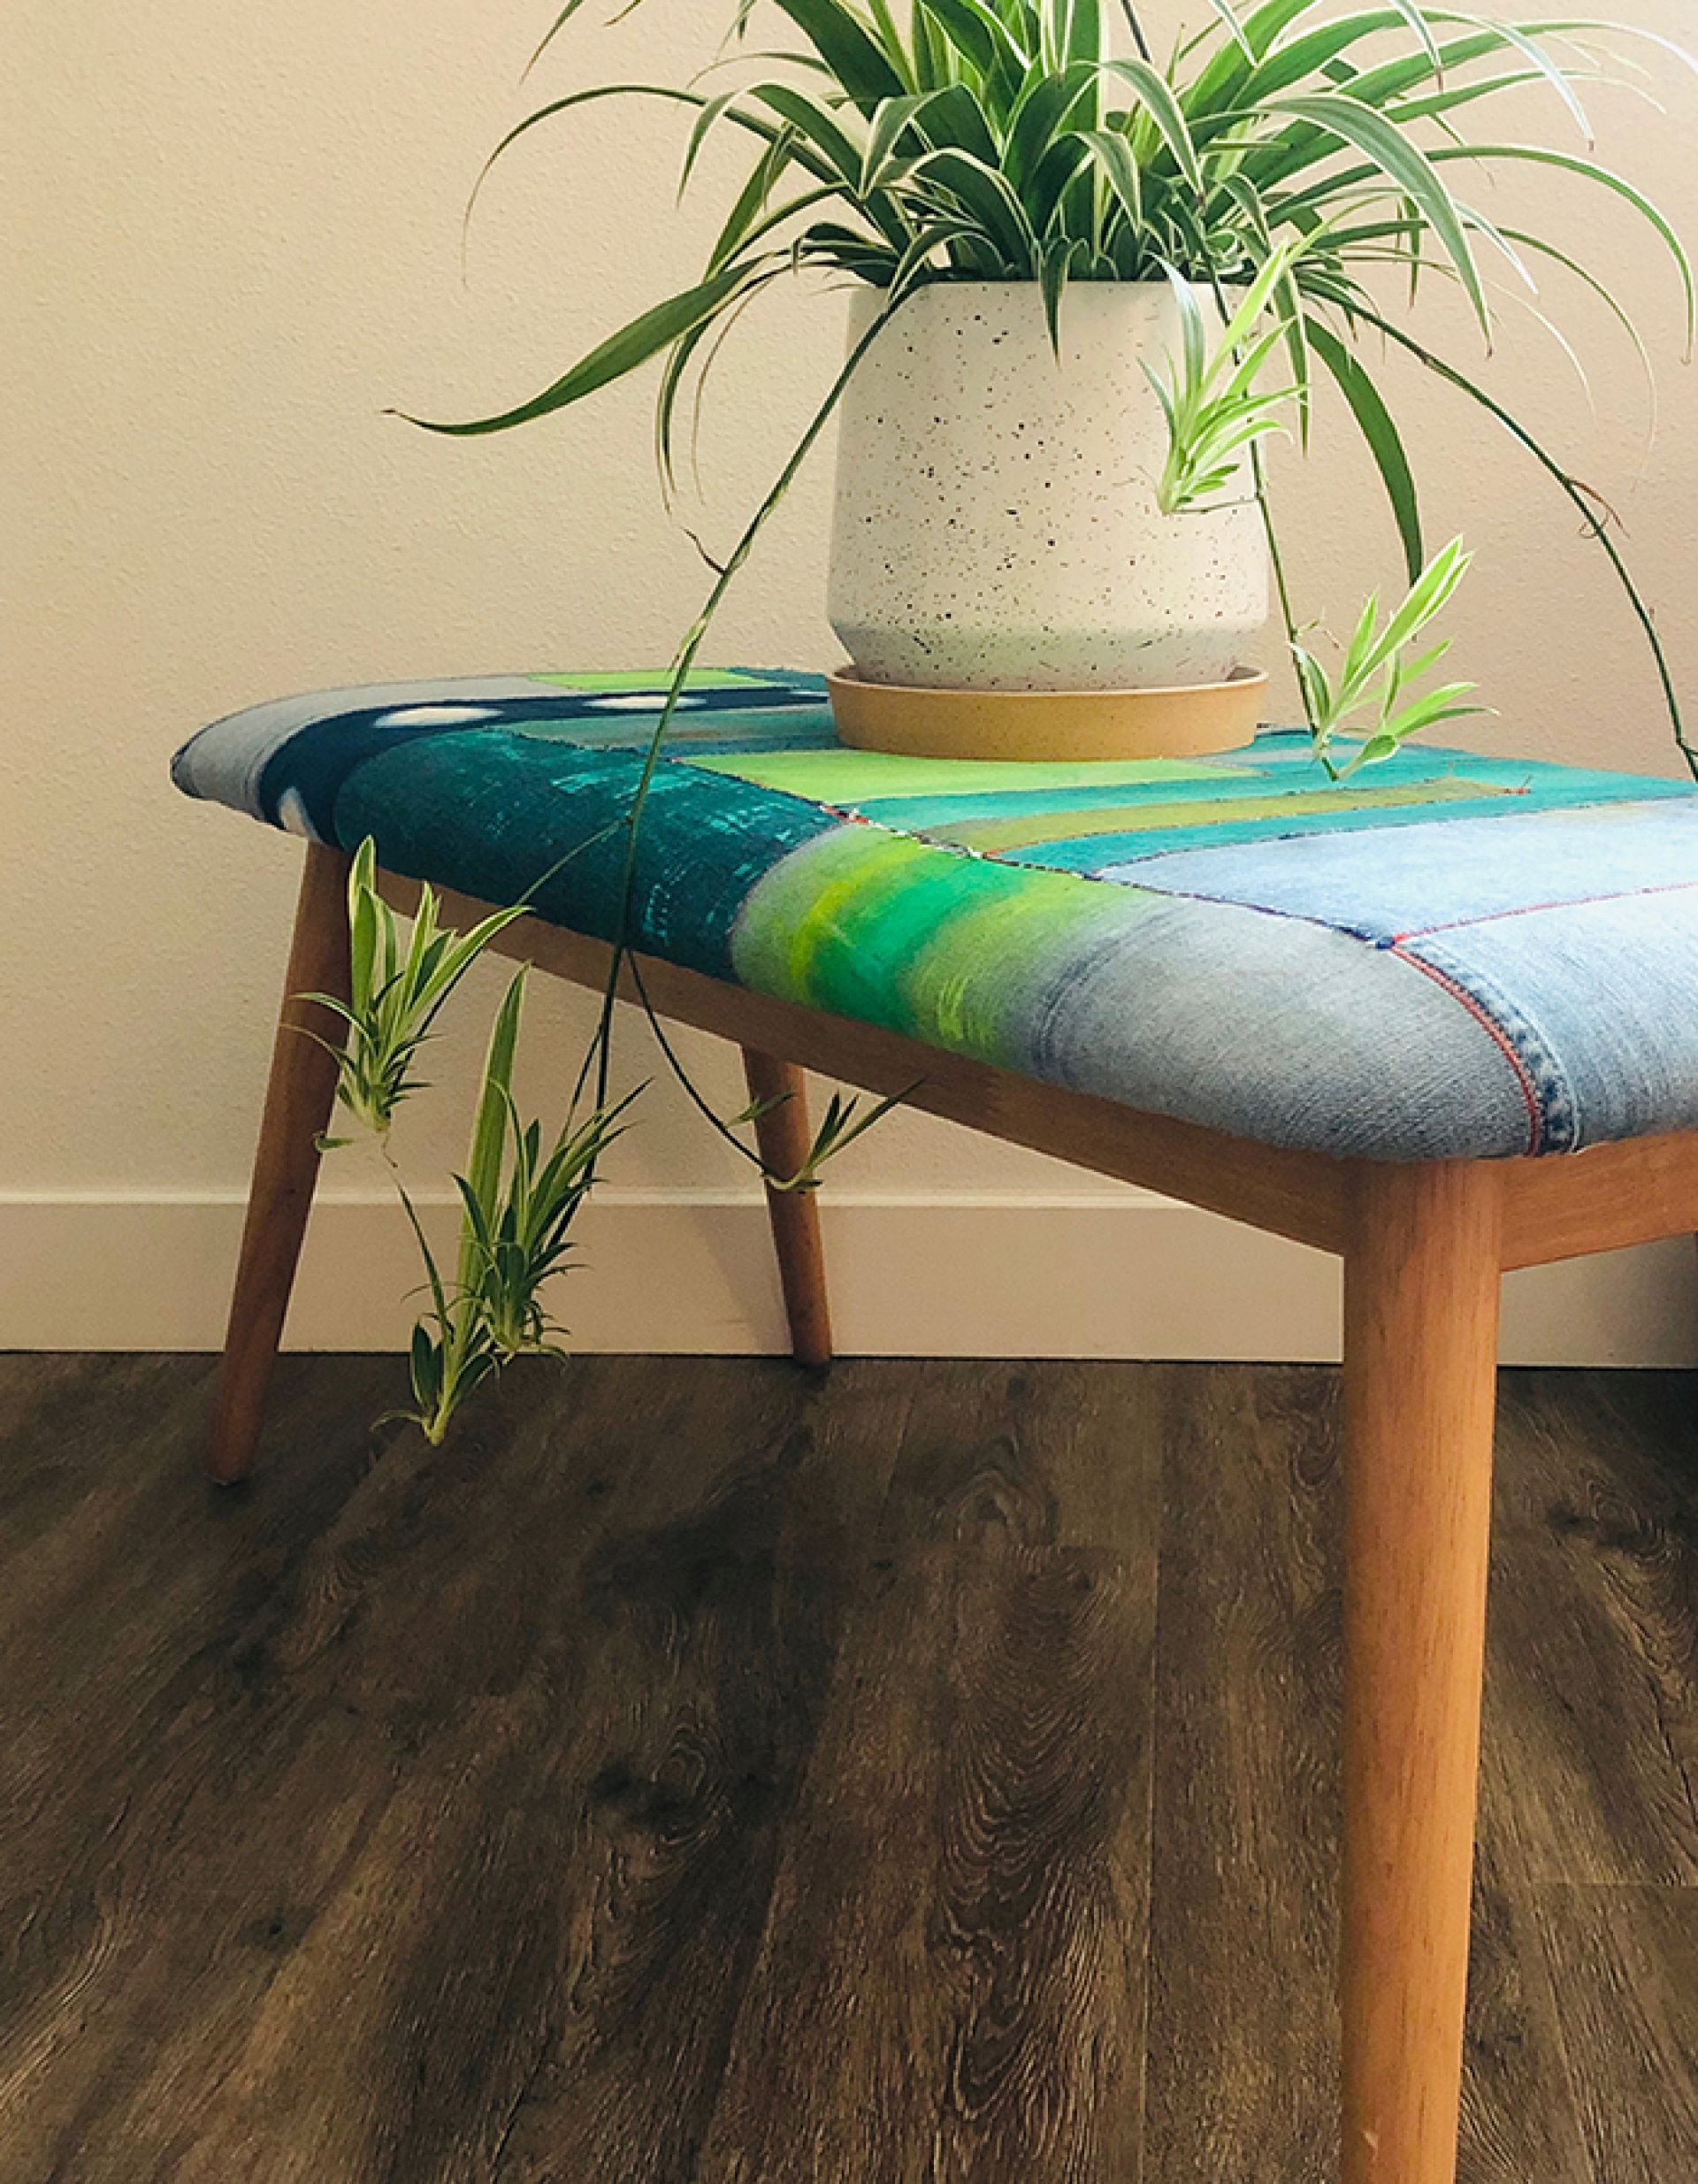 Reupholstered bench using painted denim and reclaimed jean scraps, 2020